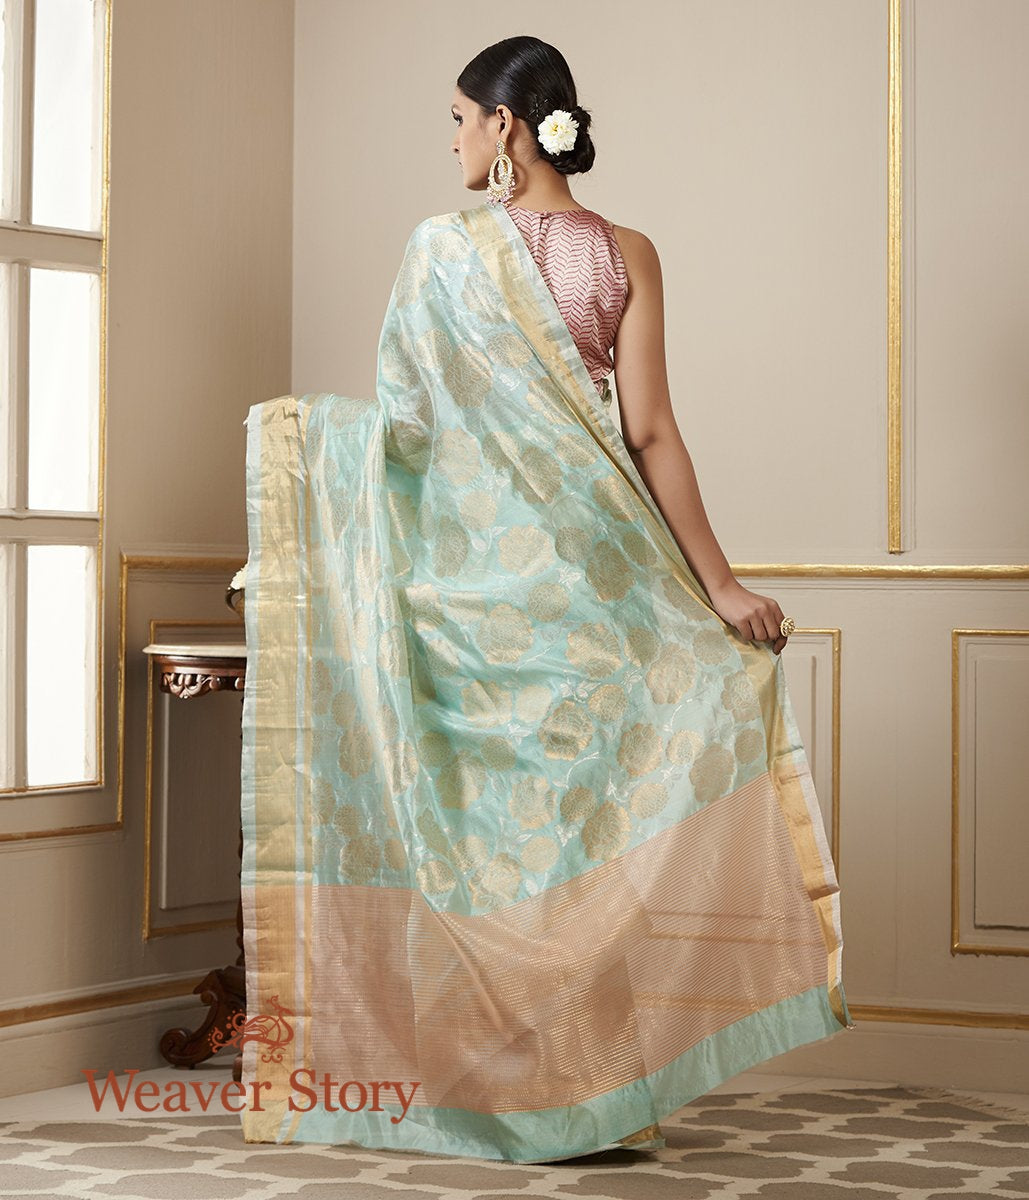 Handwoven_Light_Blue_Chanderi_Silk_Saree_with_Gold_and_Silver_Zari_Floral_Jaal_WeaverStory_03